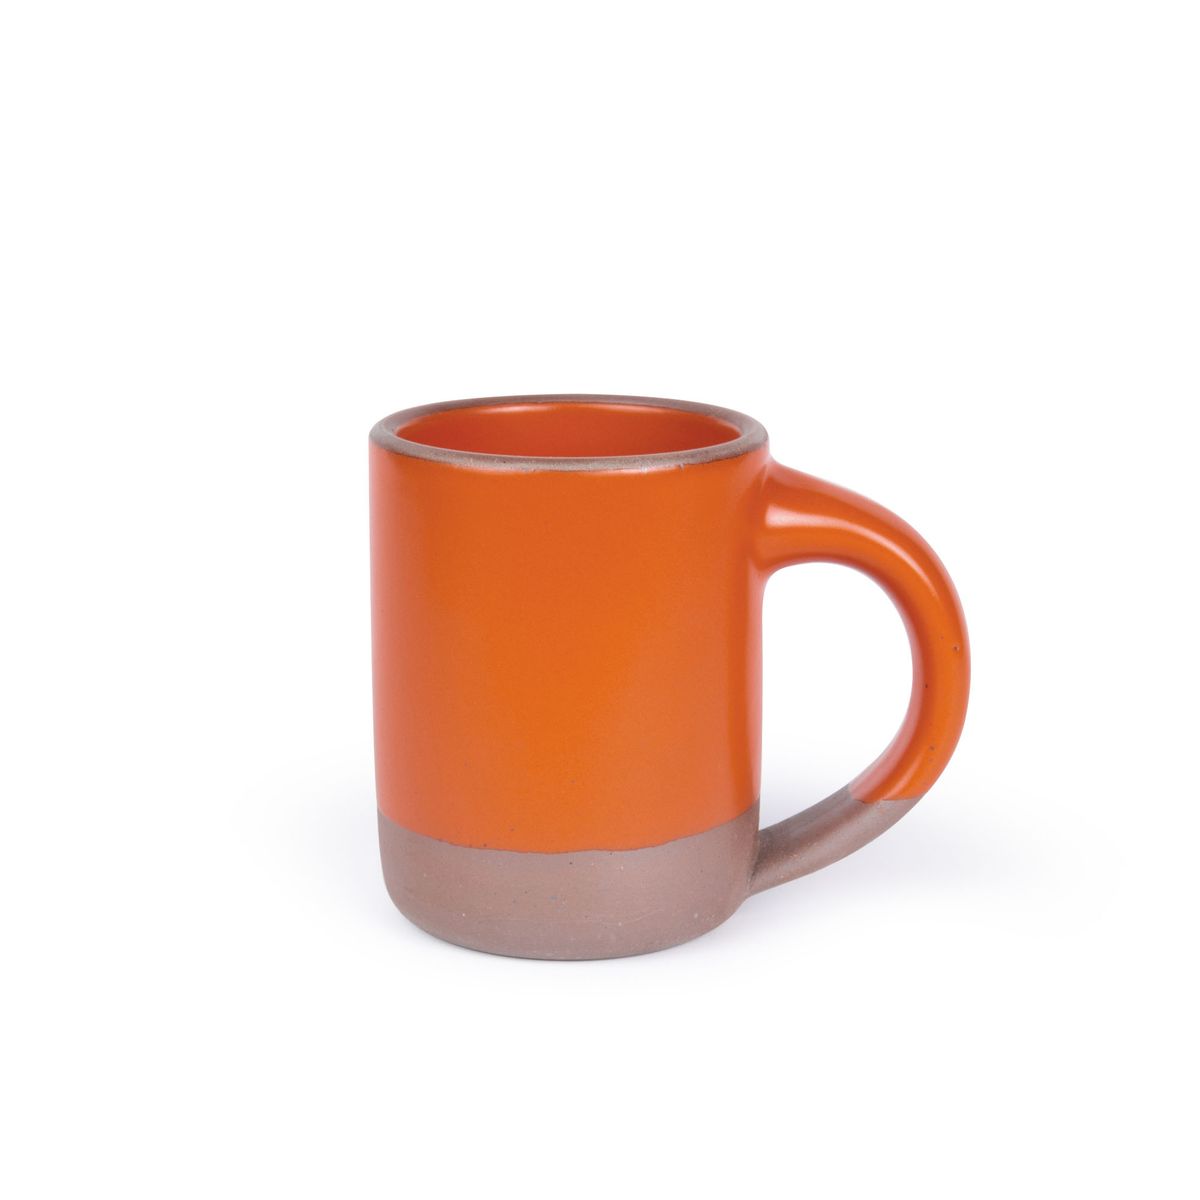 A medium sized ceramic mug with handle in a bold orange color featuring iron speckles and unglazed rim and bottom base.